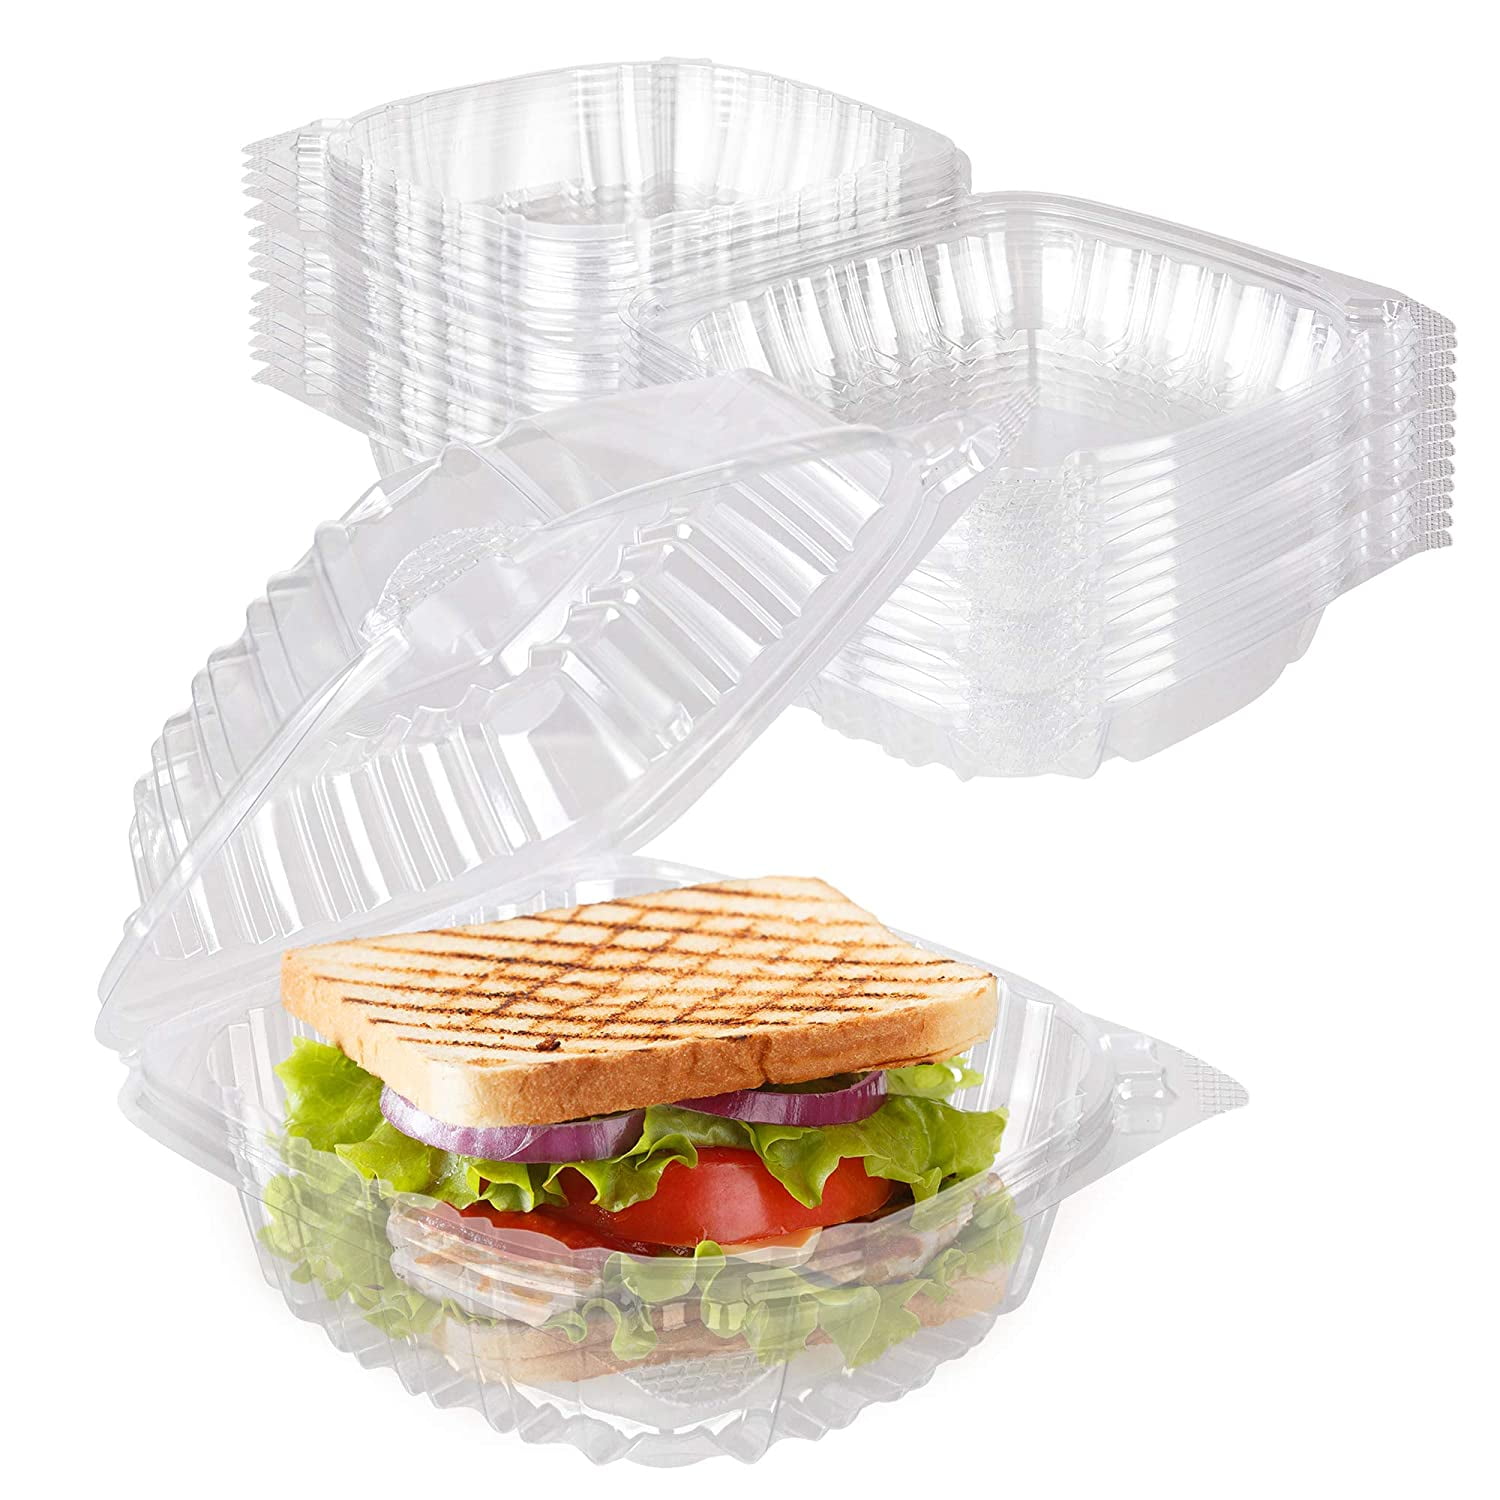 60 Clear Plastic 4.5" Food Take Out Clamshell Container Cupcake Cookie Favor D9 